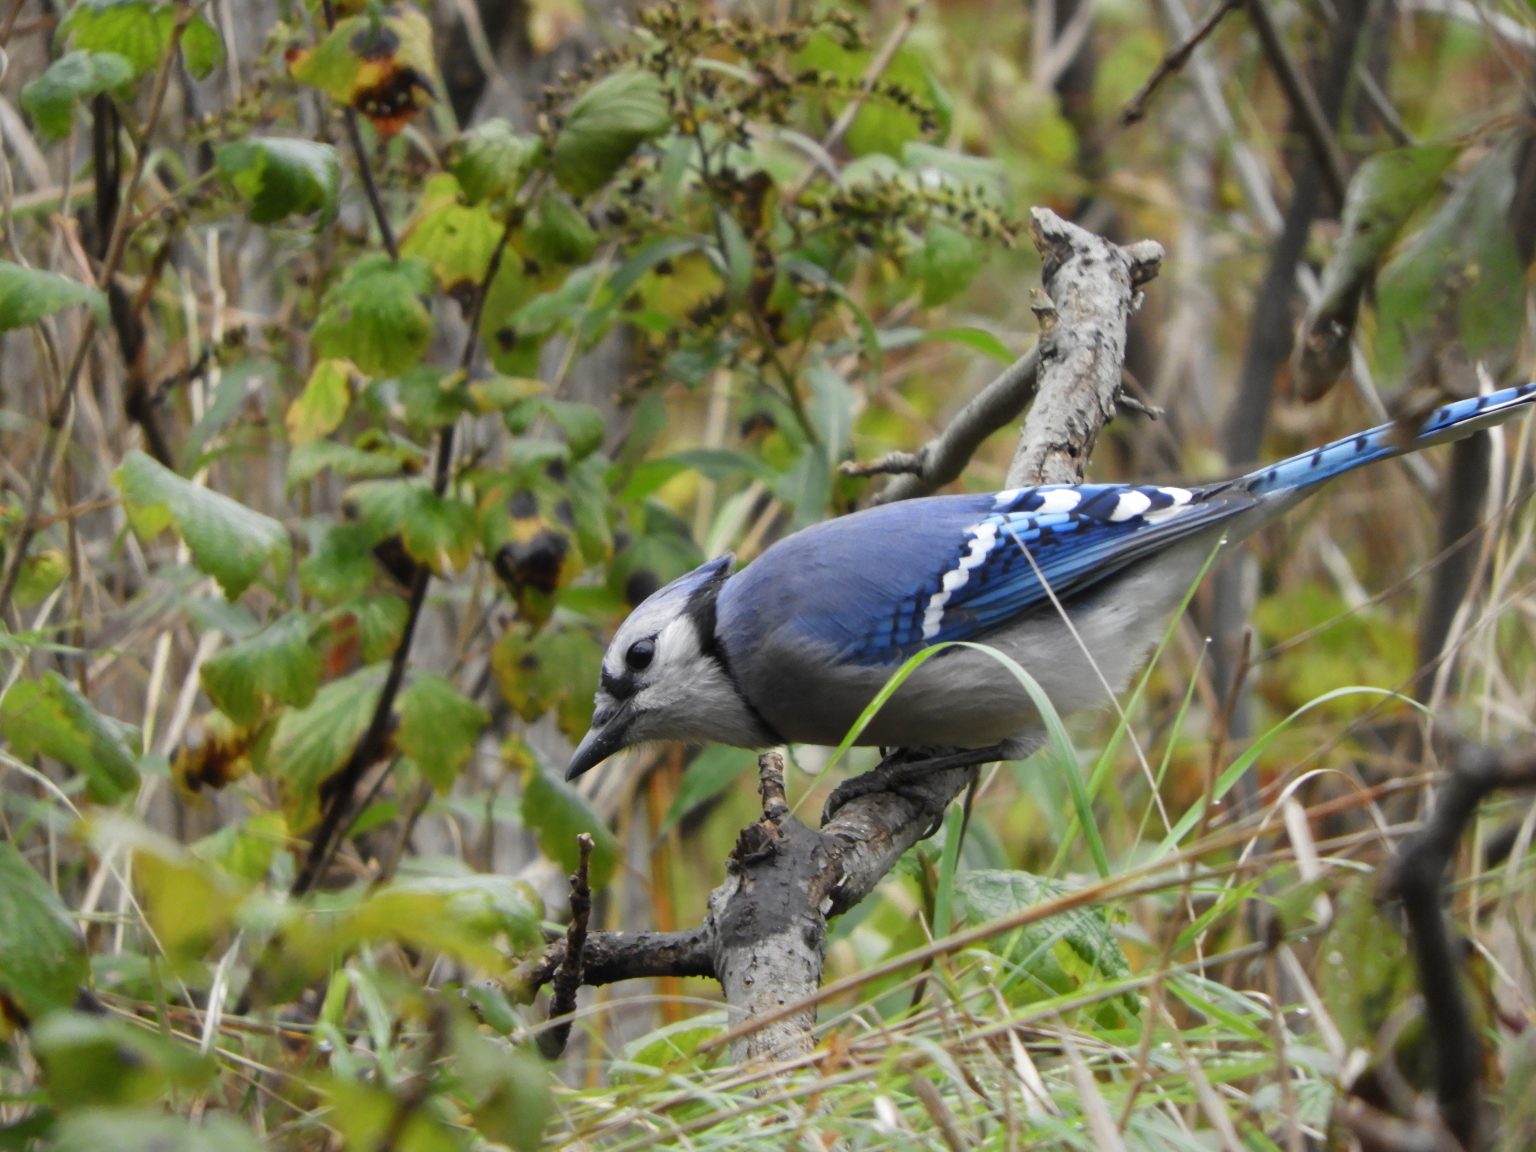 A blue bird with white on its head and on the edges of its wings, with black around its neck and under the white on its wings. It is sitting on a branch, located in Burlington's Hendrie Valley.